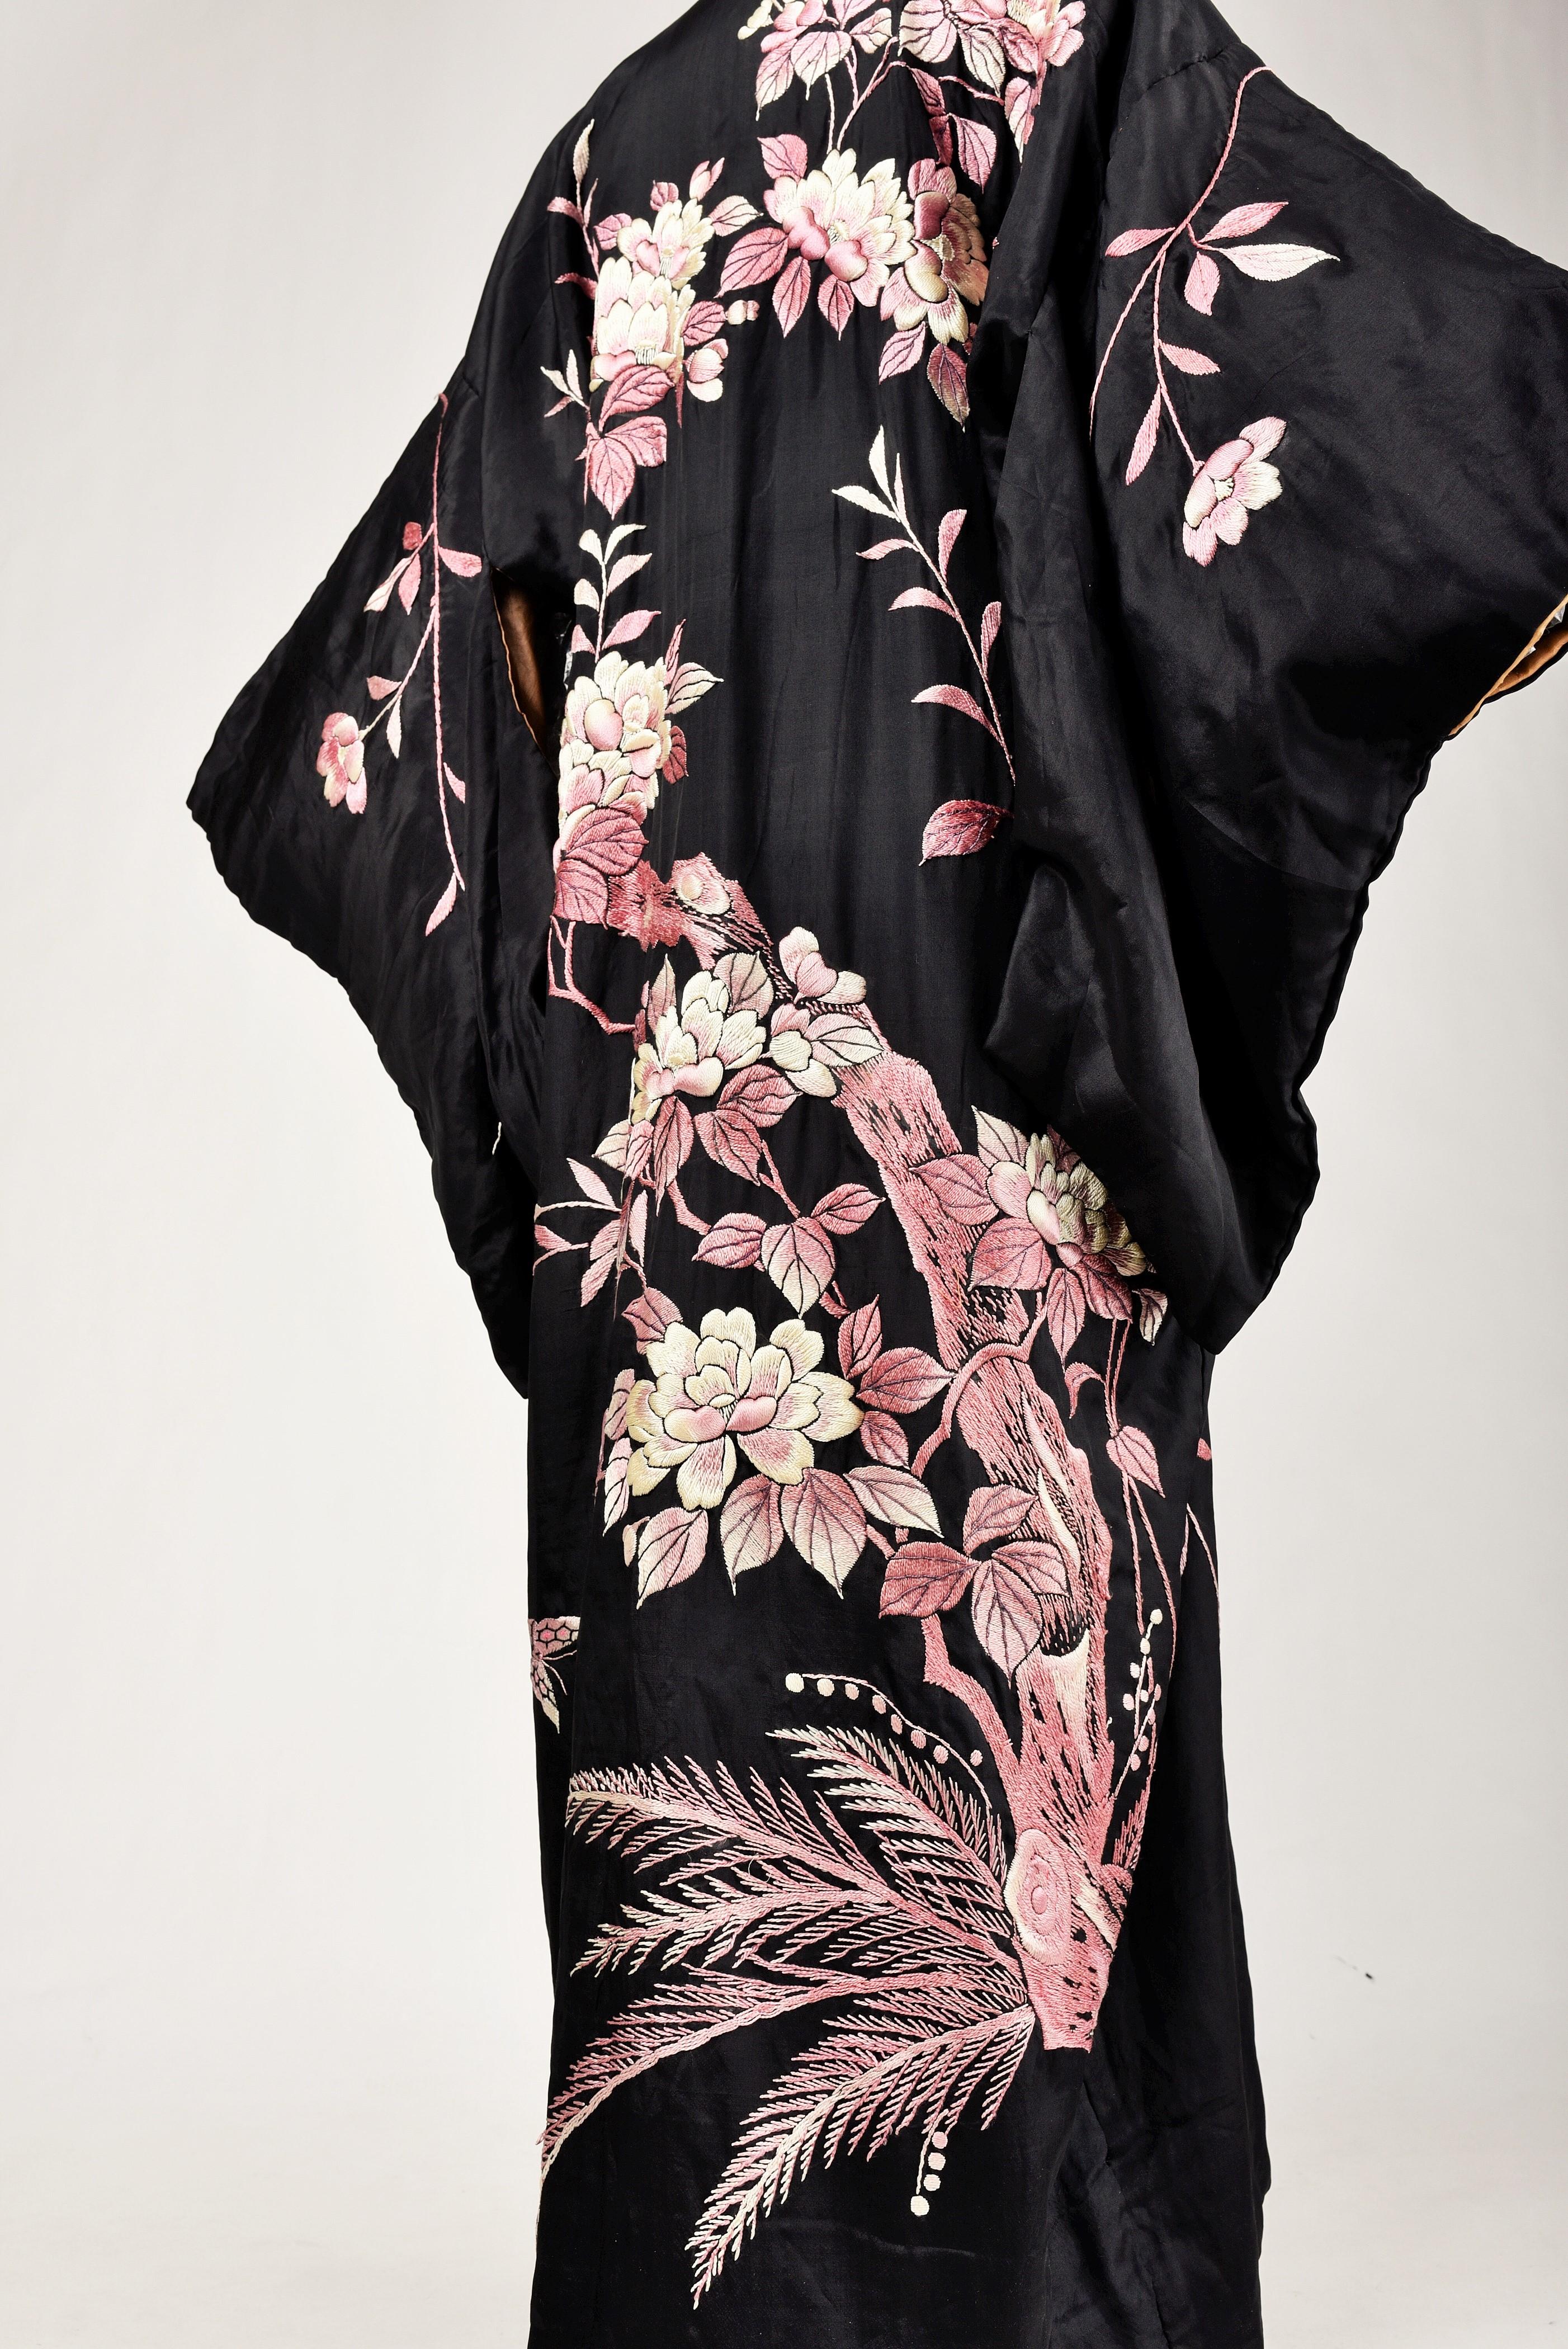 Circa 1920 -1940

France

Black taffeta kimono embroidered with a flowering tree, Japanese work from the 1920s. Beautiful embroidery in relief of mercerized silk in a camaieu of pink, parma and white with a tree of life design full of blooming